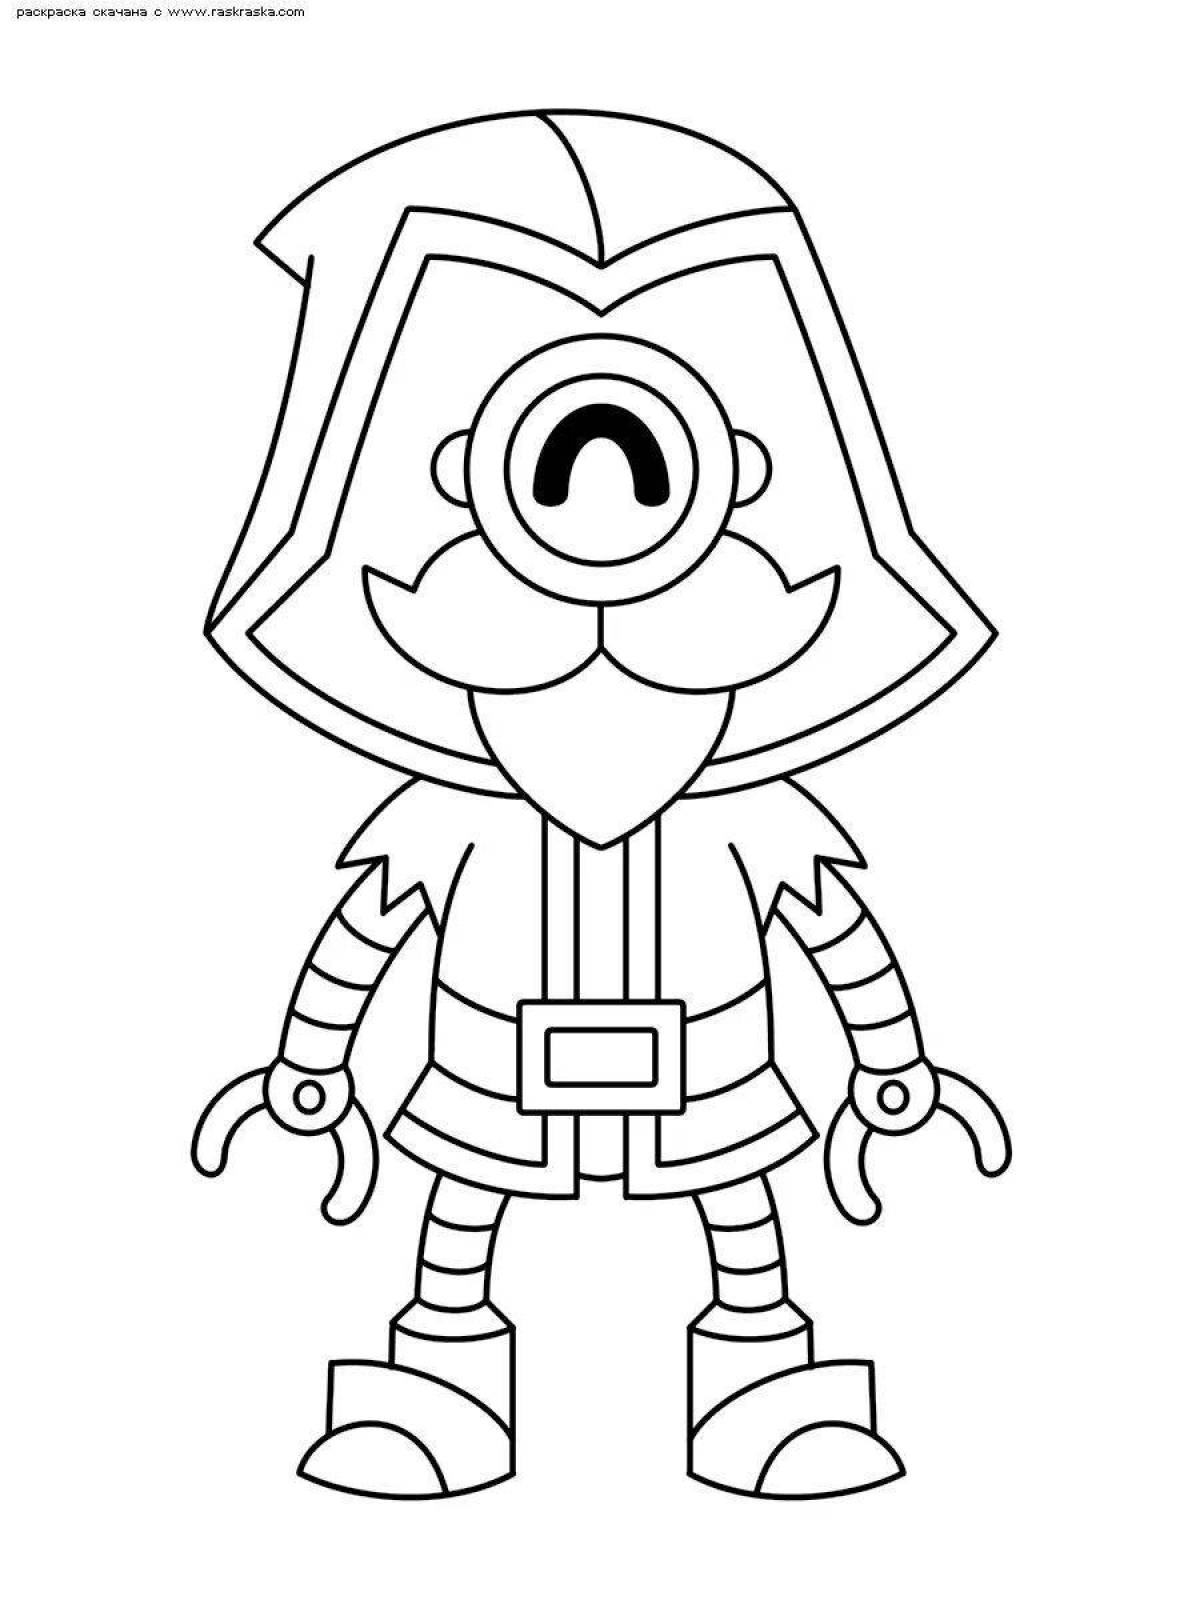 Bea's animated coloring page